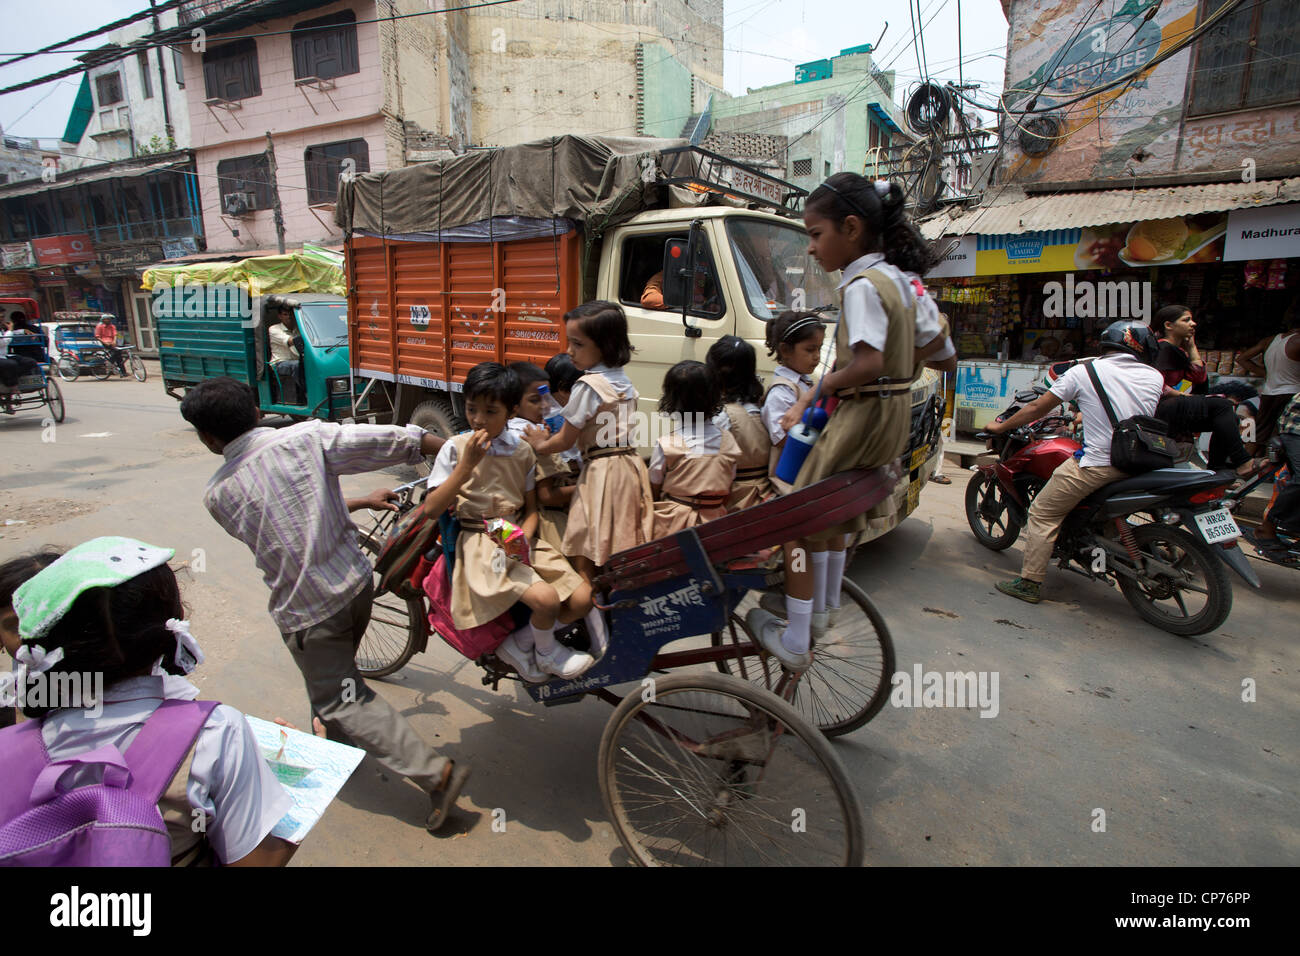 A group of young girls ride to school on a rickshaw, daily life in Old Delhi, India. Stock Photo